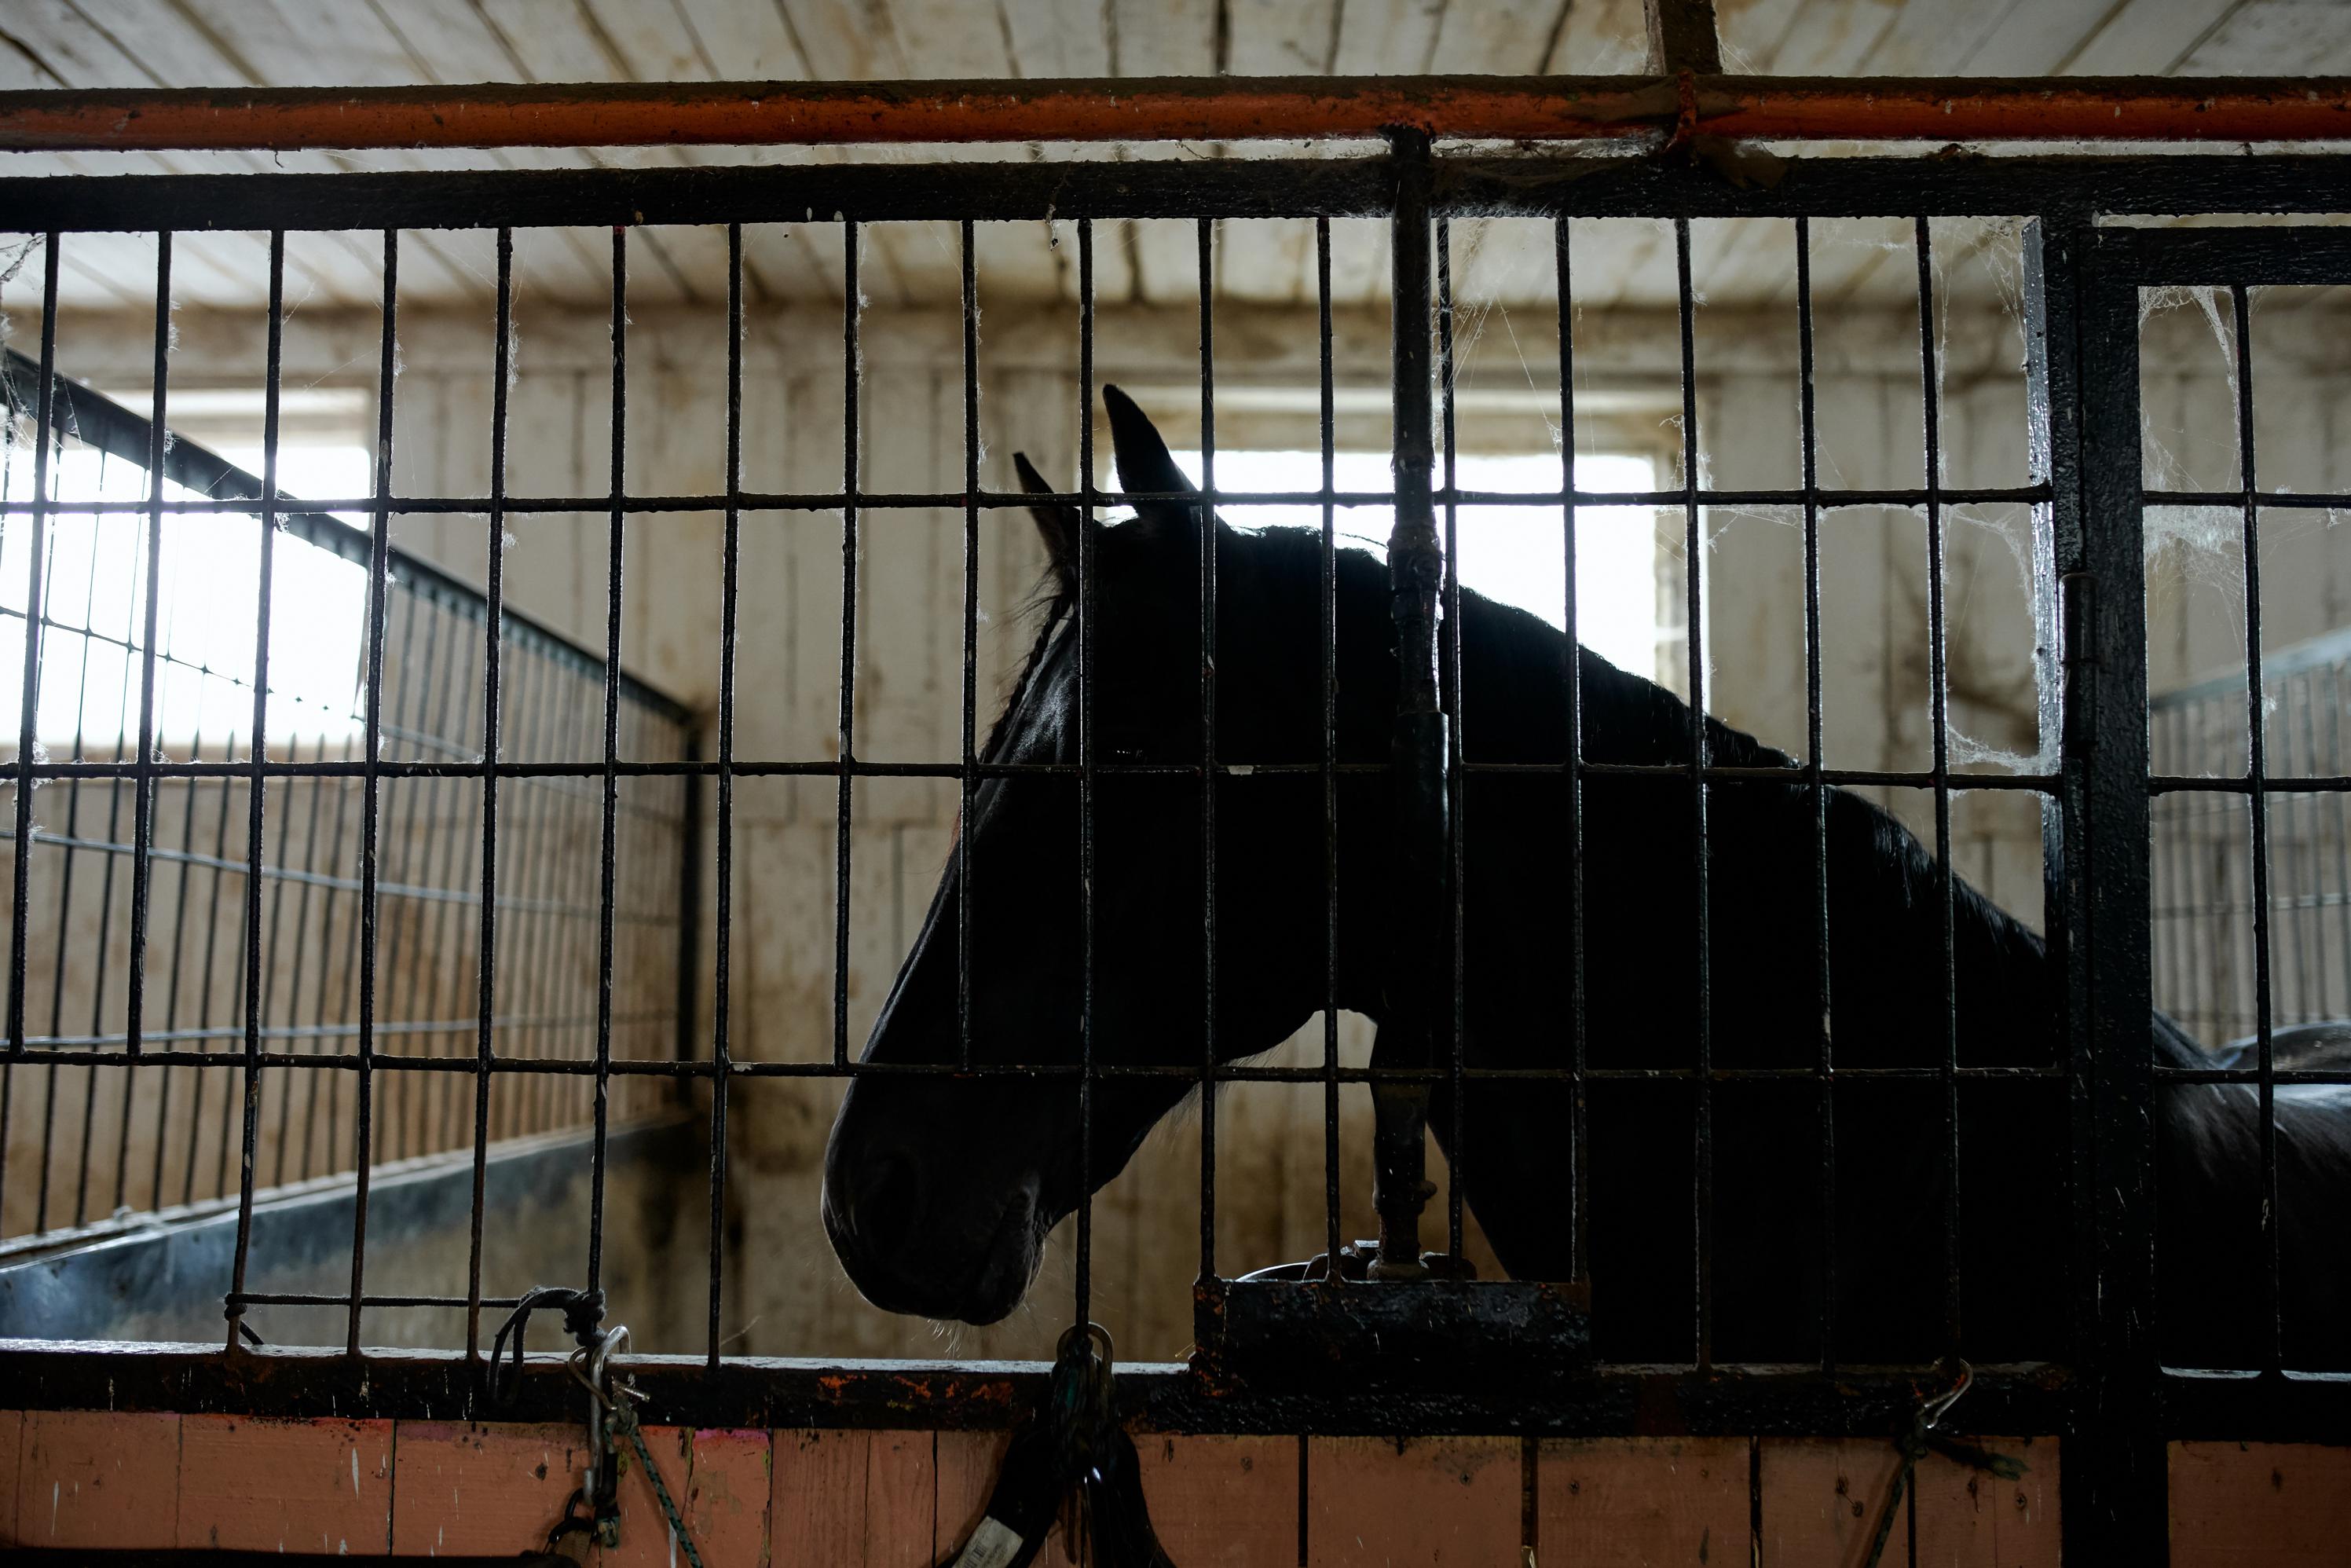 The materials used in horse stall mats and their potential toxicity